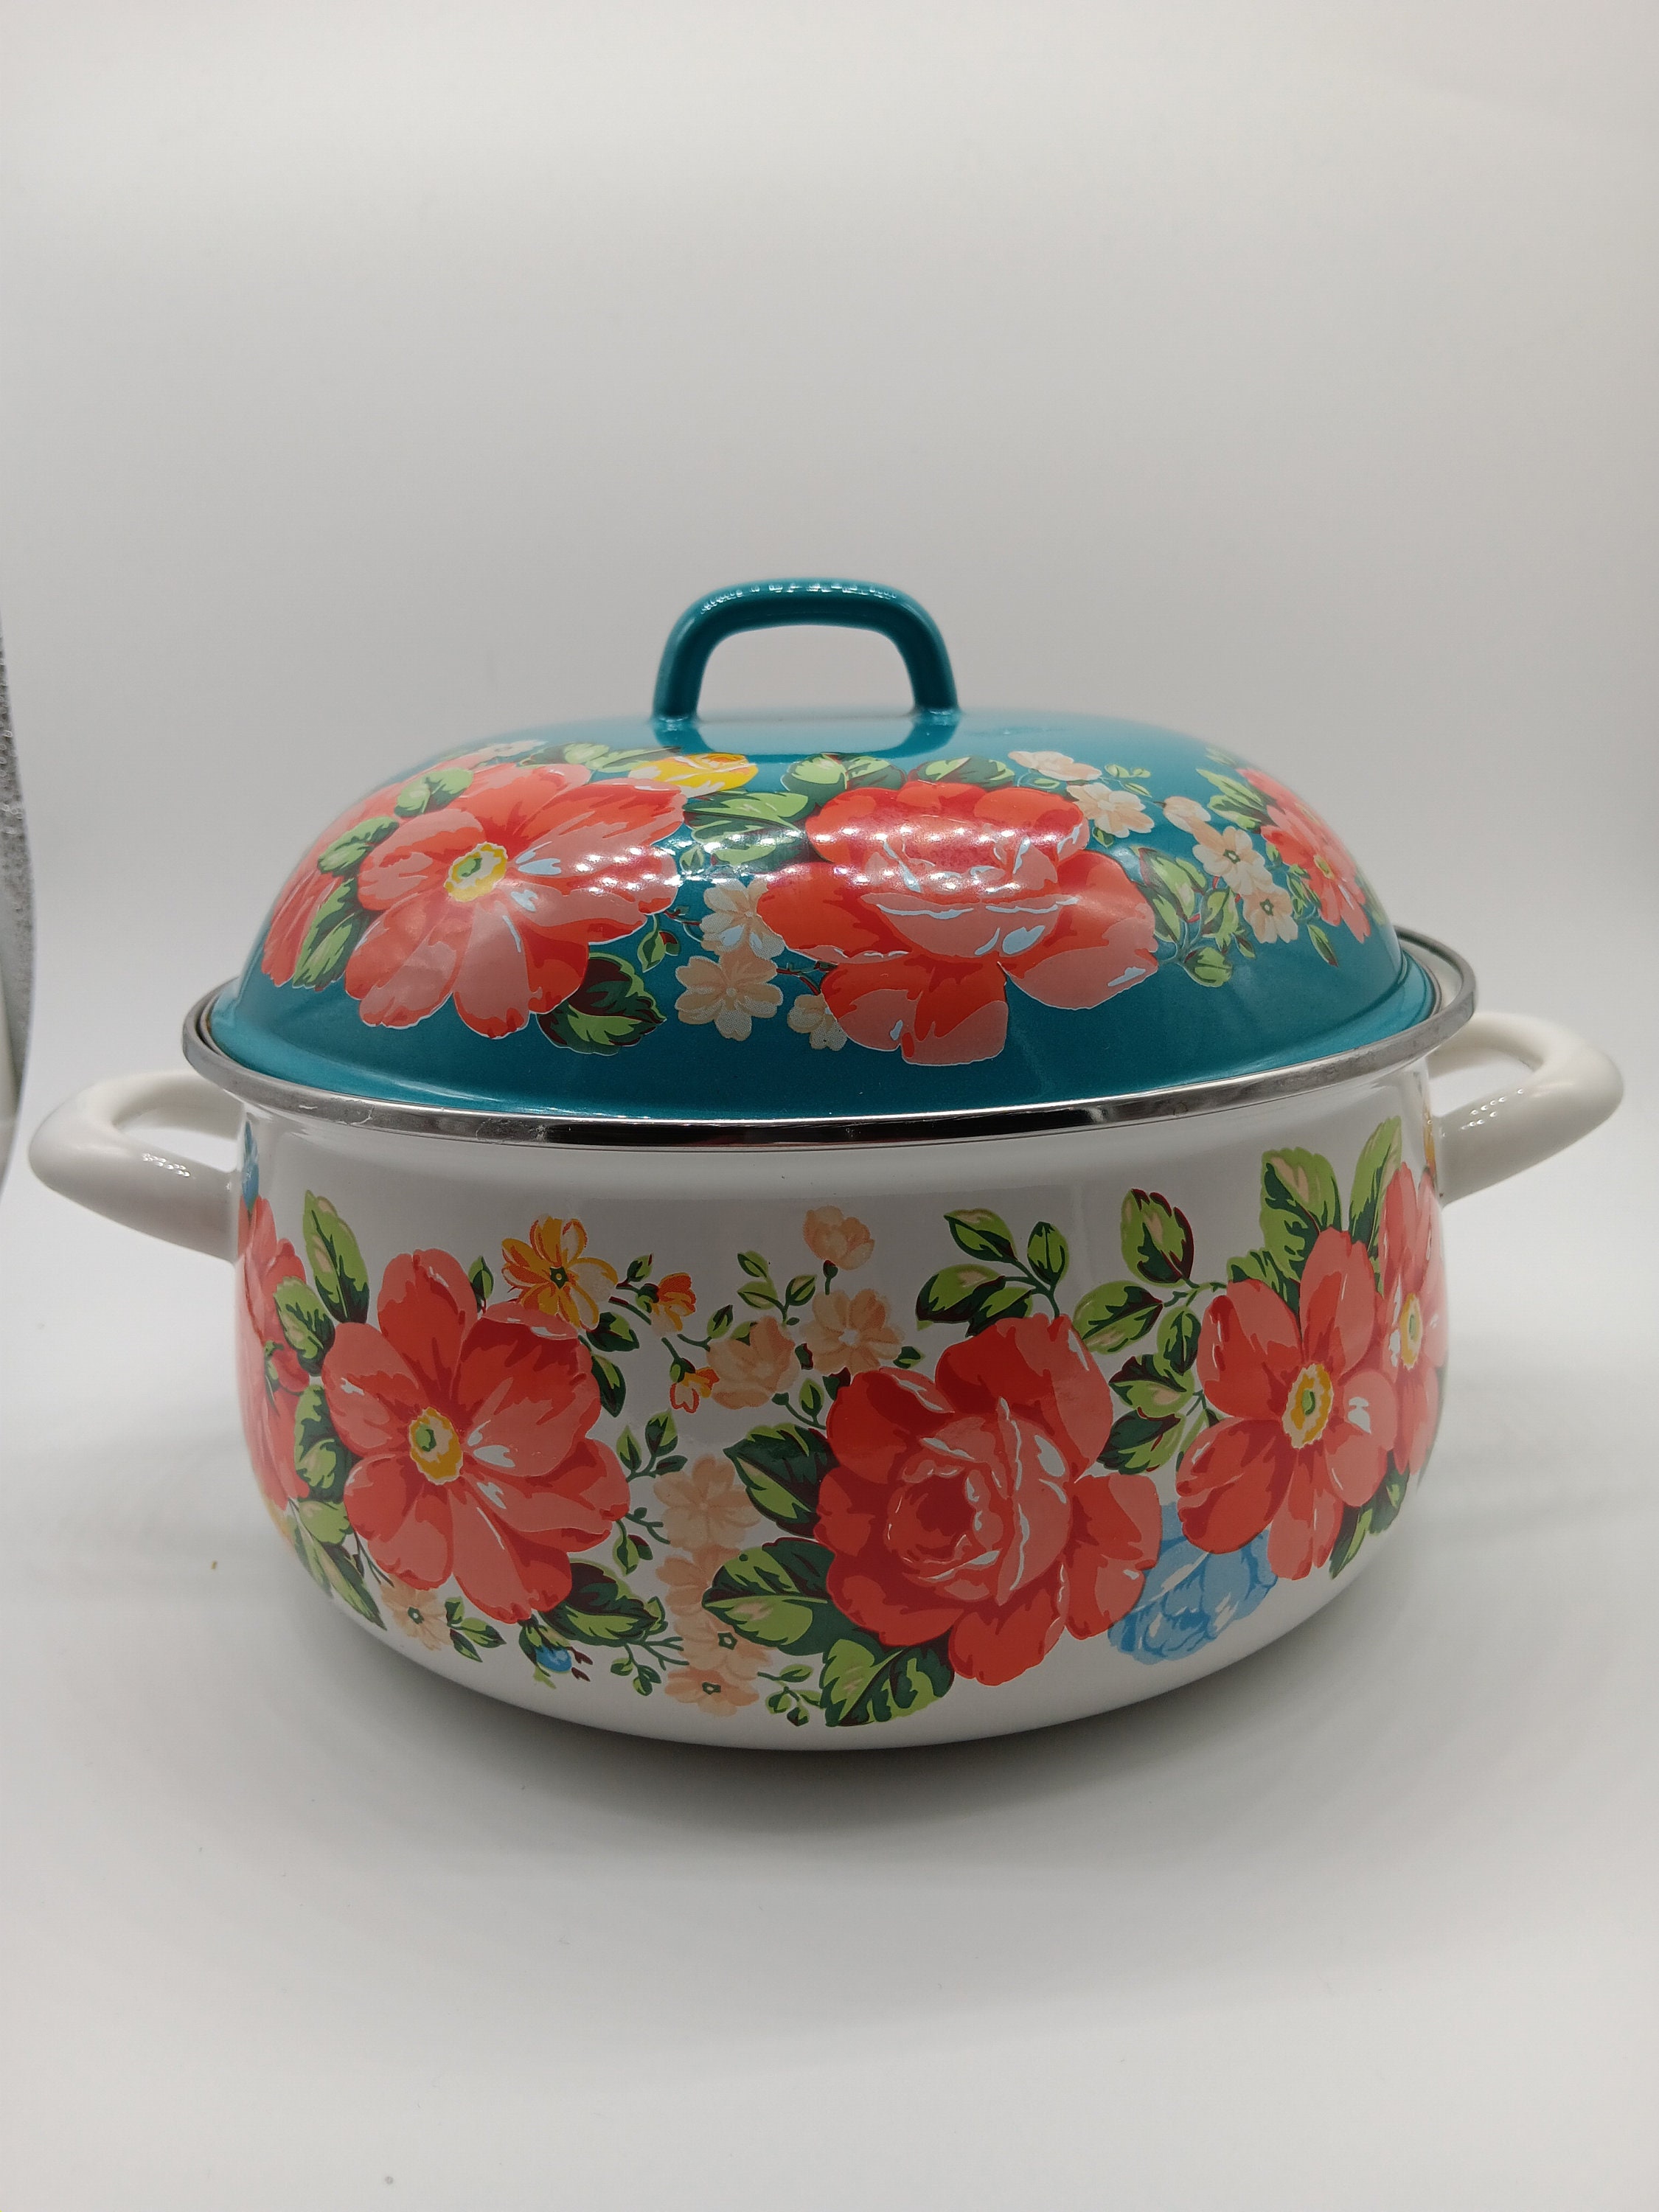 The Pioneer Woman Vintage Floral 4 Quart Dutch Oven With Lid 